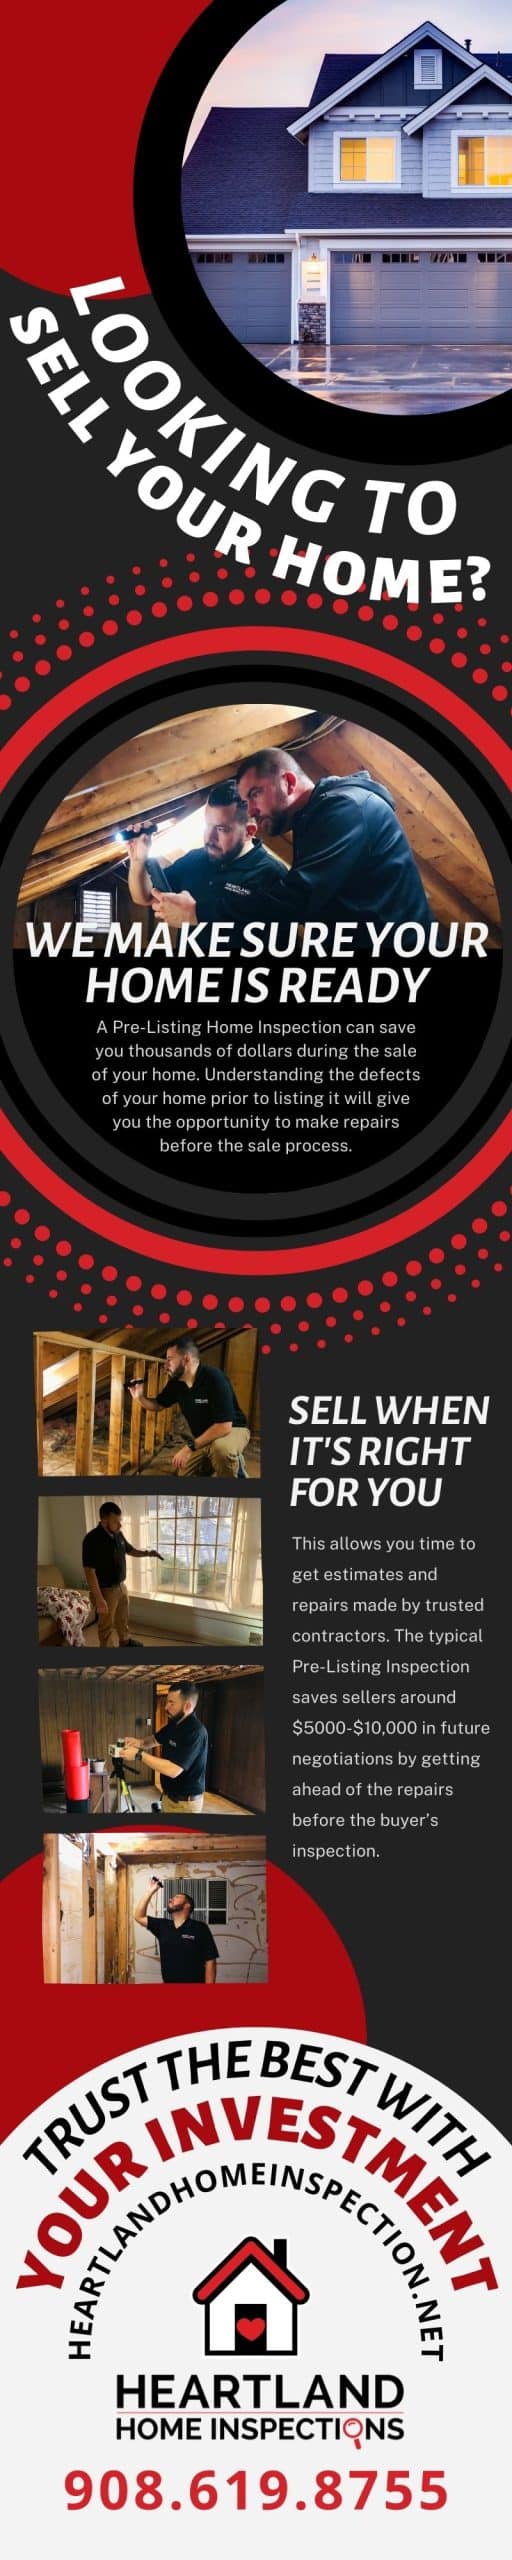 Looking to Sell Your Home? 3